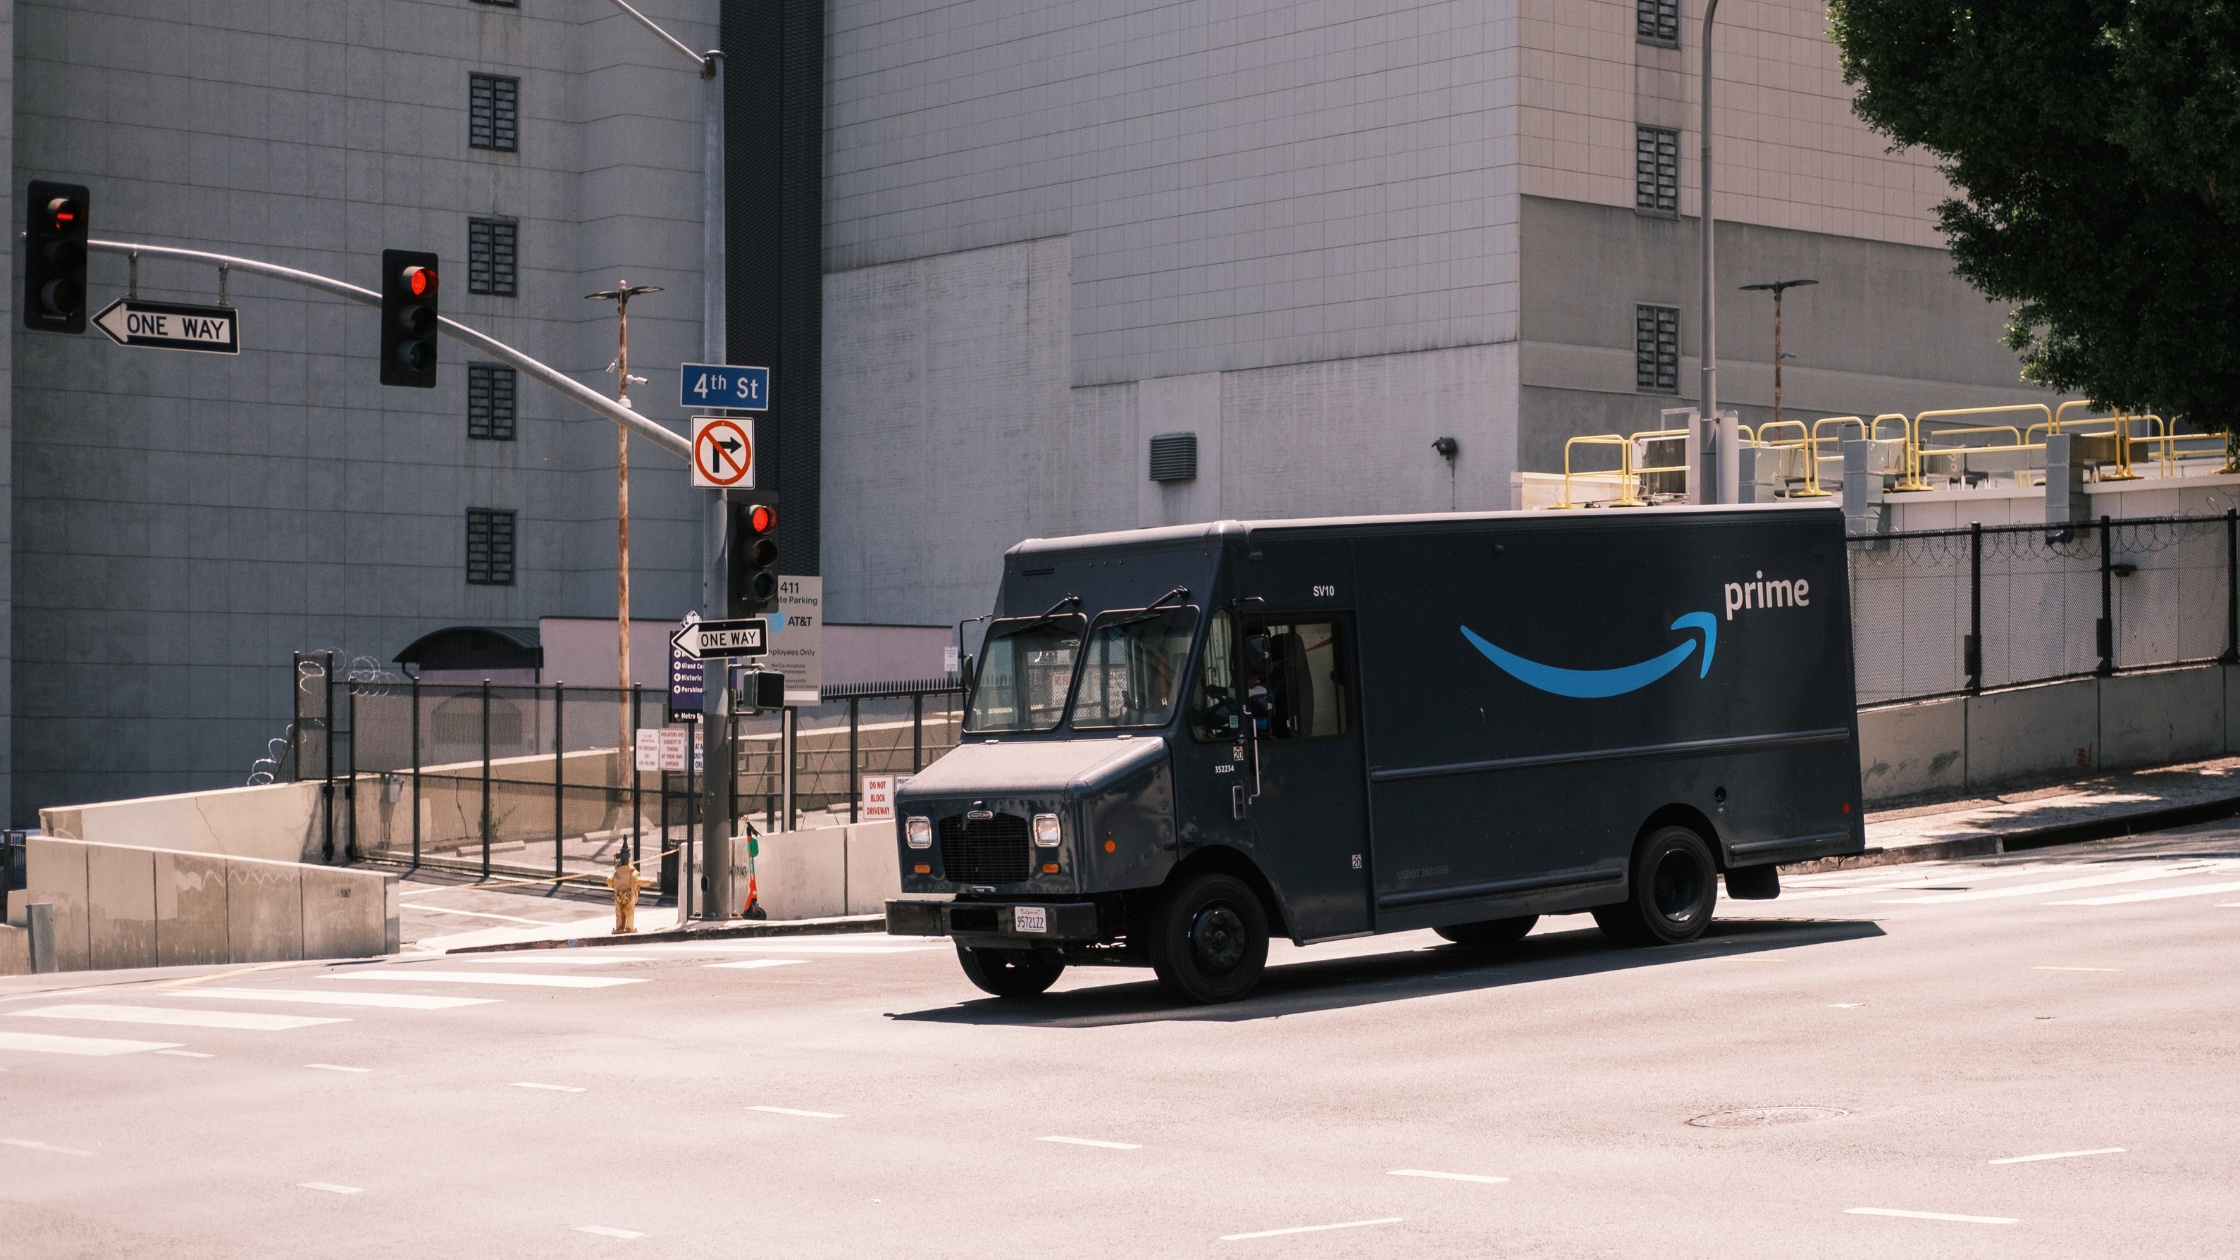 An Amazon Prime truck stops at an intersection